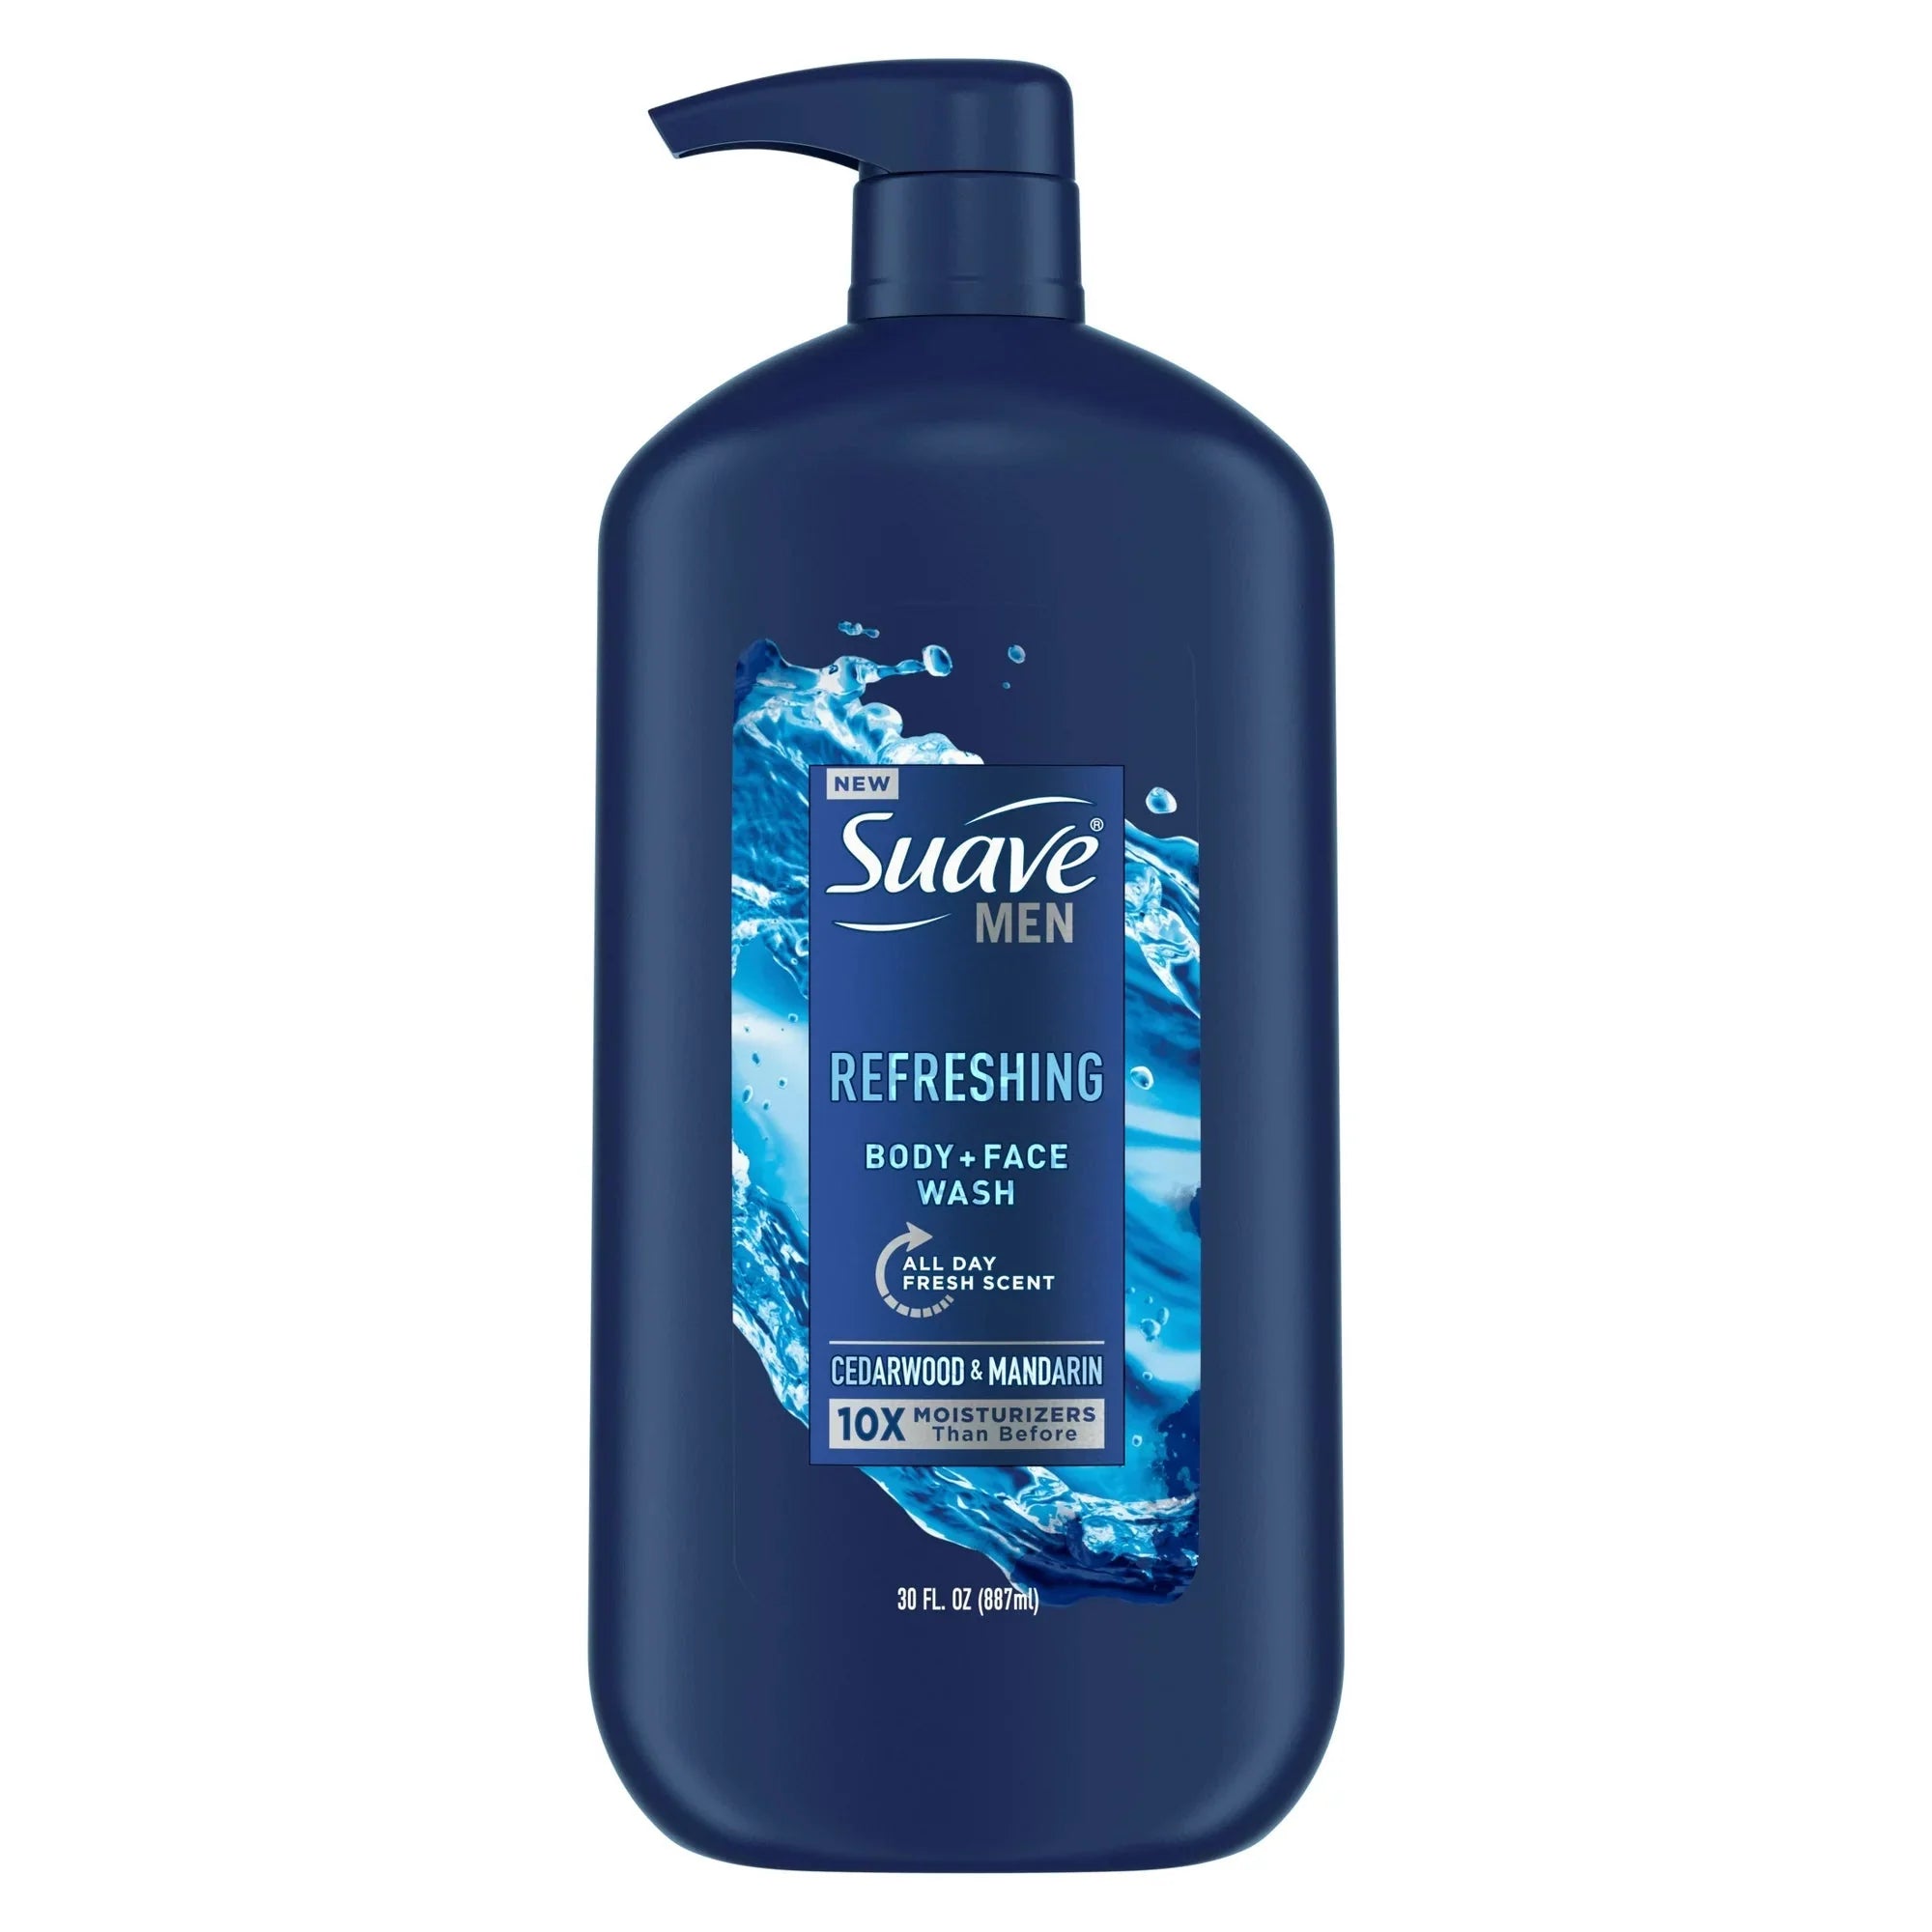 Wholesale prices with free shipping all over United States Suave Men Body & Face Wash, Refreshing, Cedarwood and Mandarin, All Skin Types 30 fl oz - Steven Deals